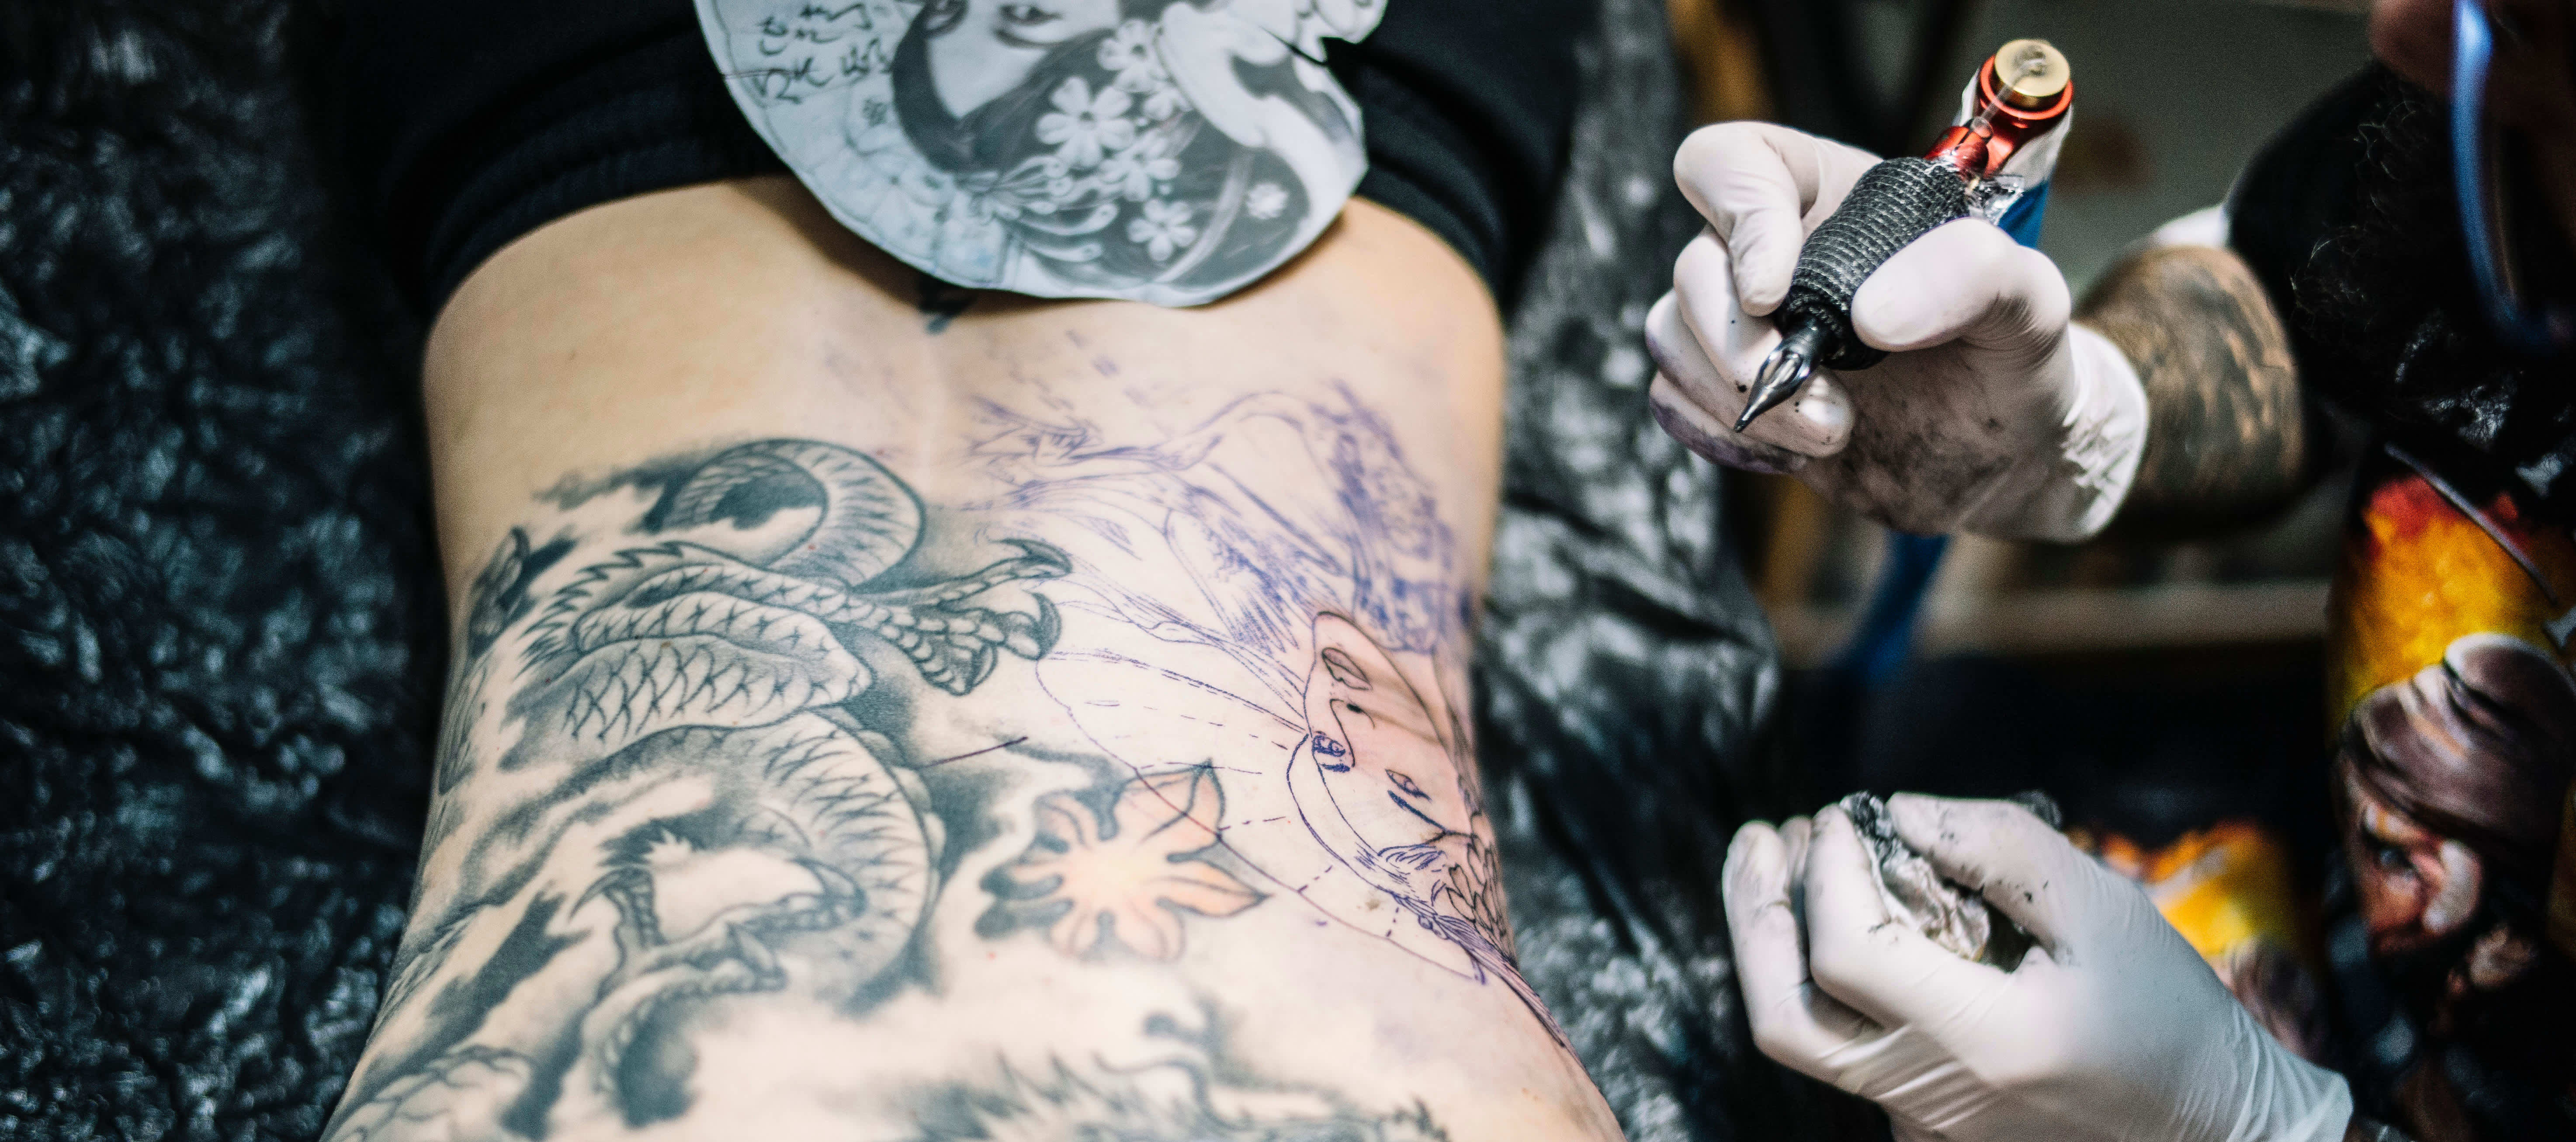 About | Black Stamp Tattoo co